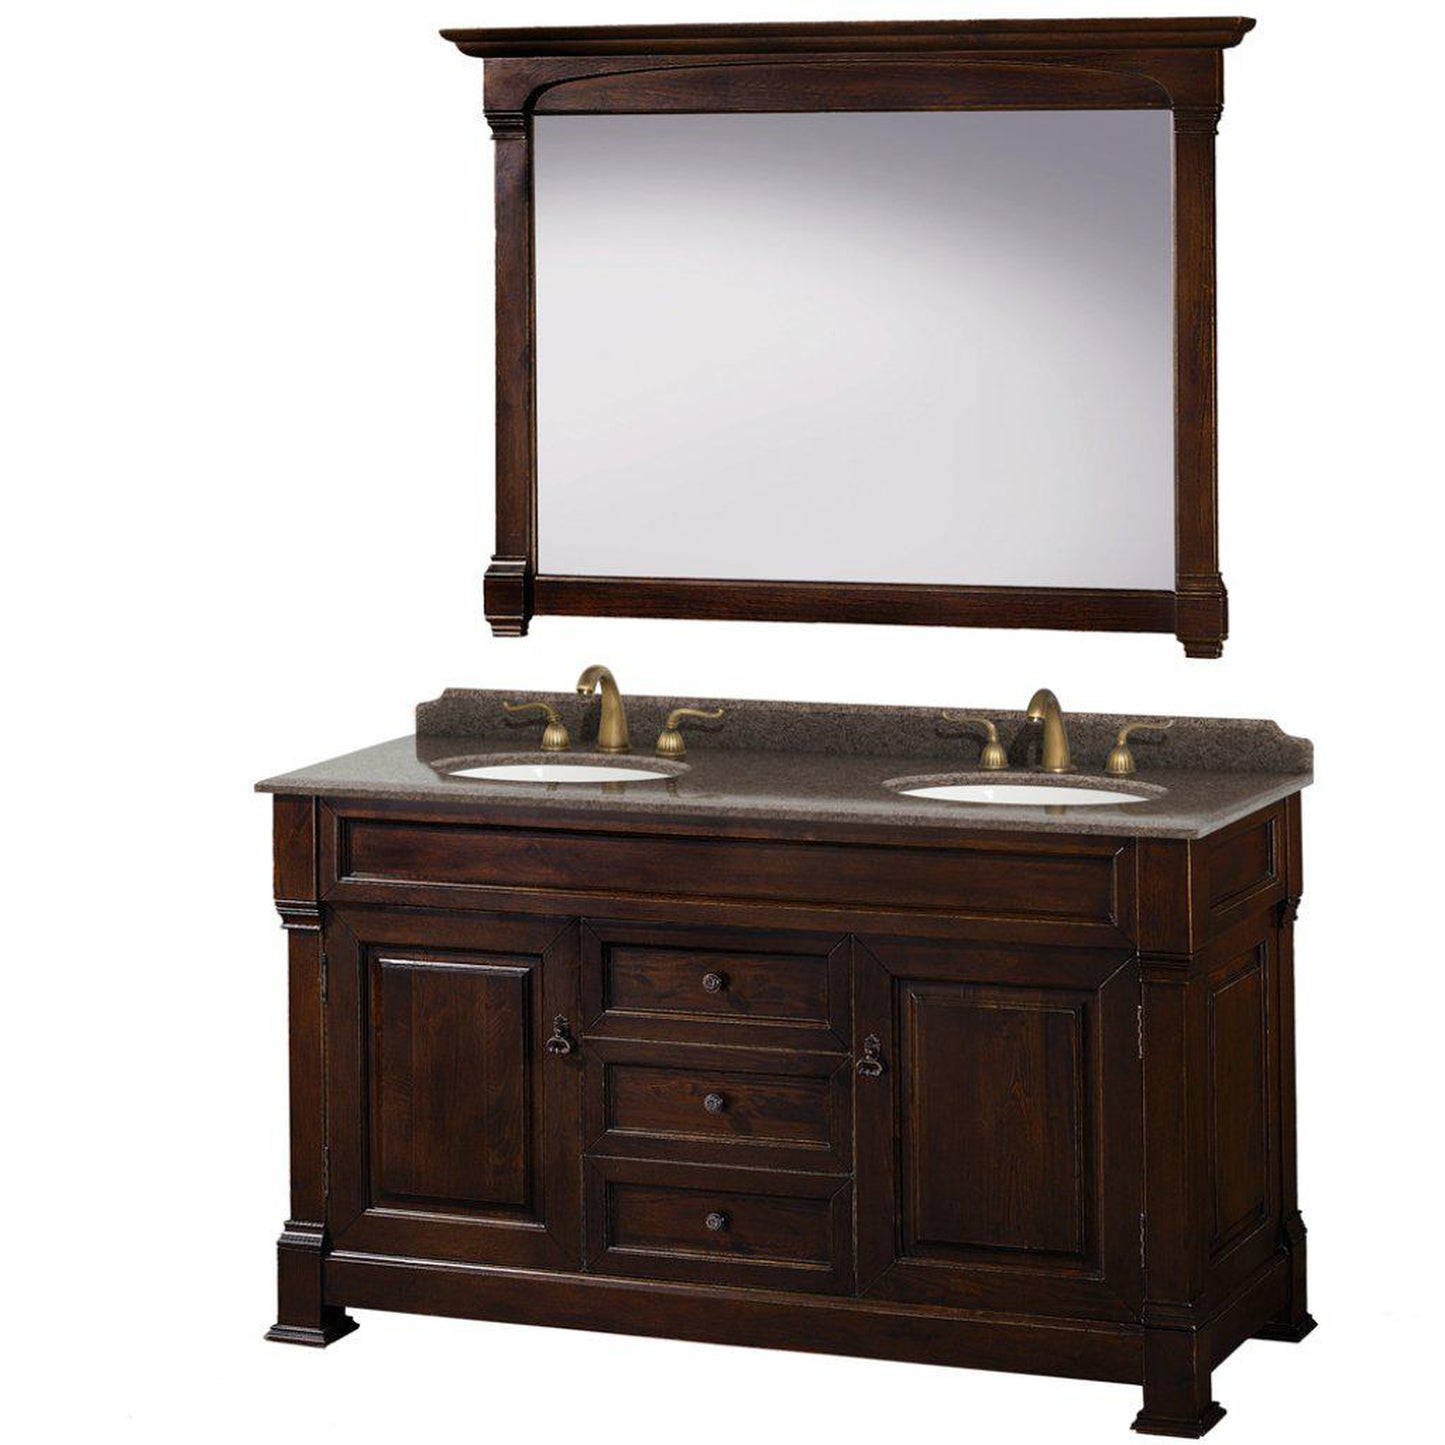 Wyndham Collection Andover 60" Double Bathroom Dark Cherry Vanity Set With Imperial Brown Granite Countertop And Undermount Oval Sink, And 56" Mirror